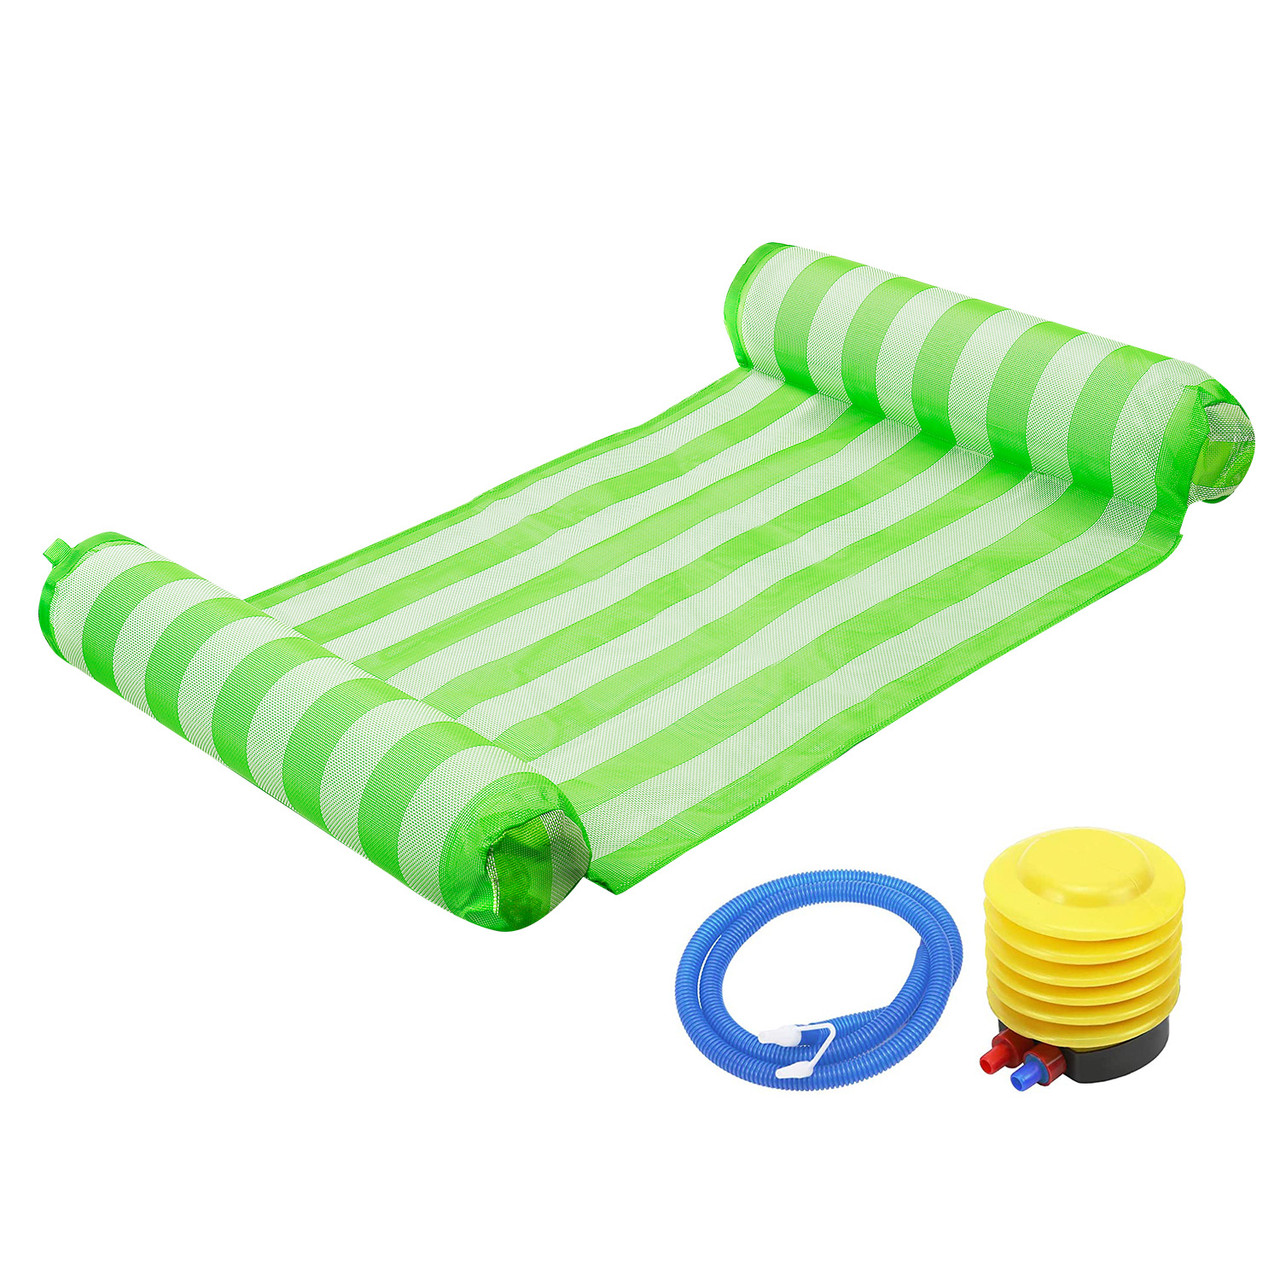 CoolWorld Inflatable Pool Float Hammock product image